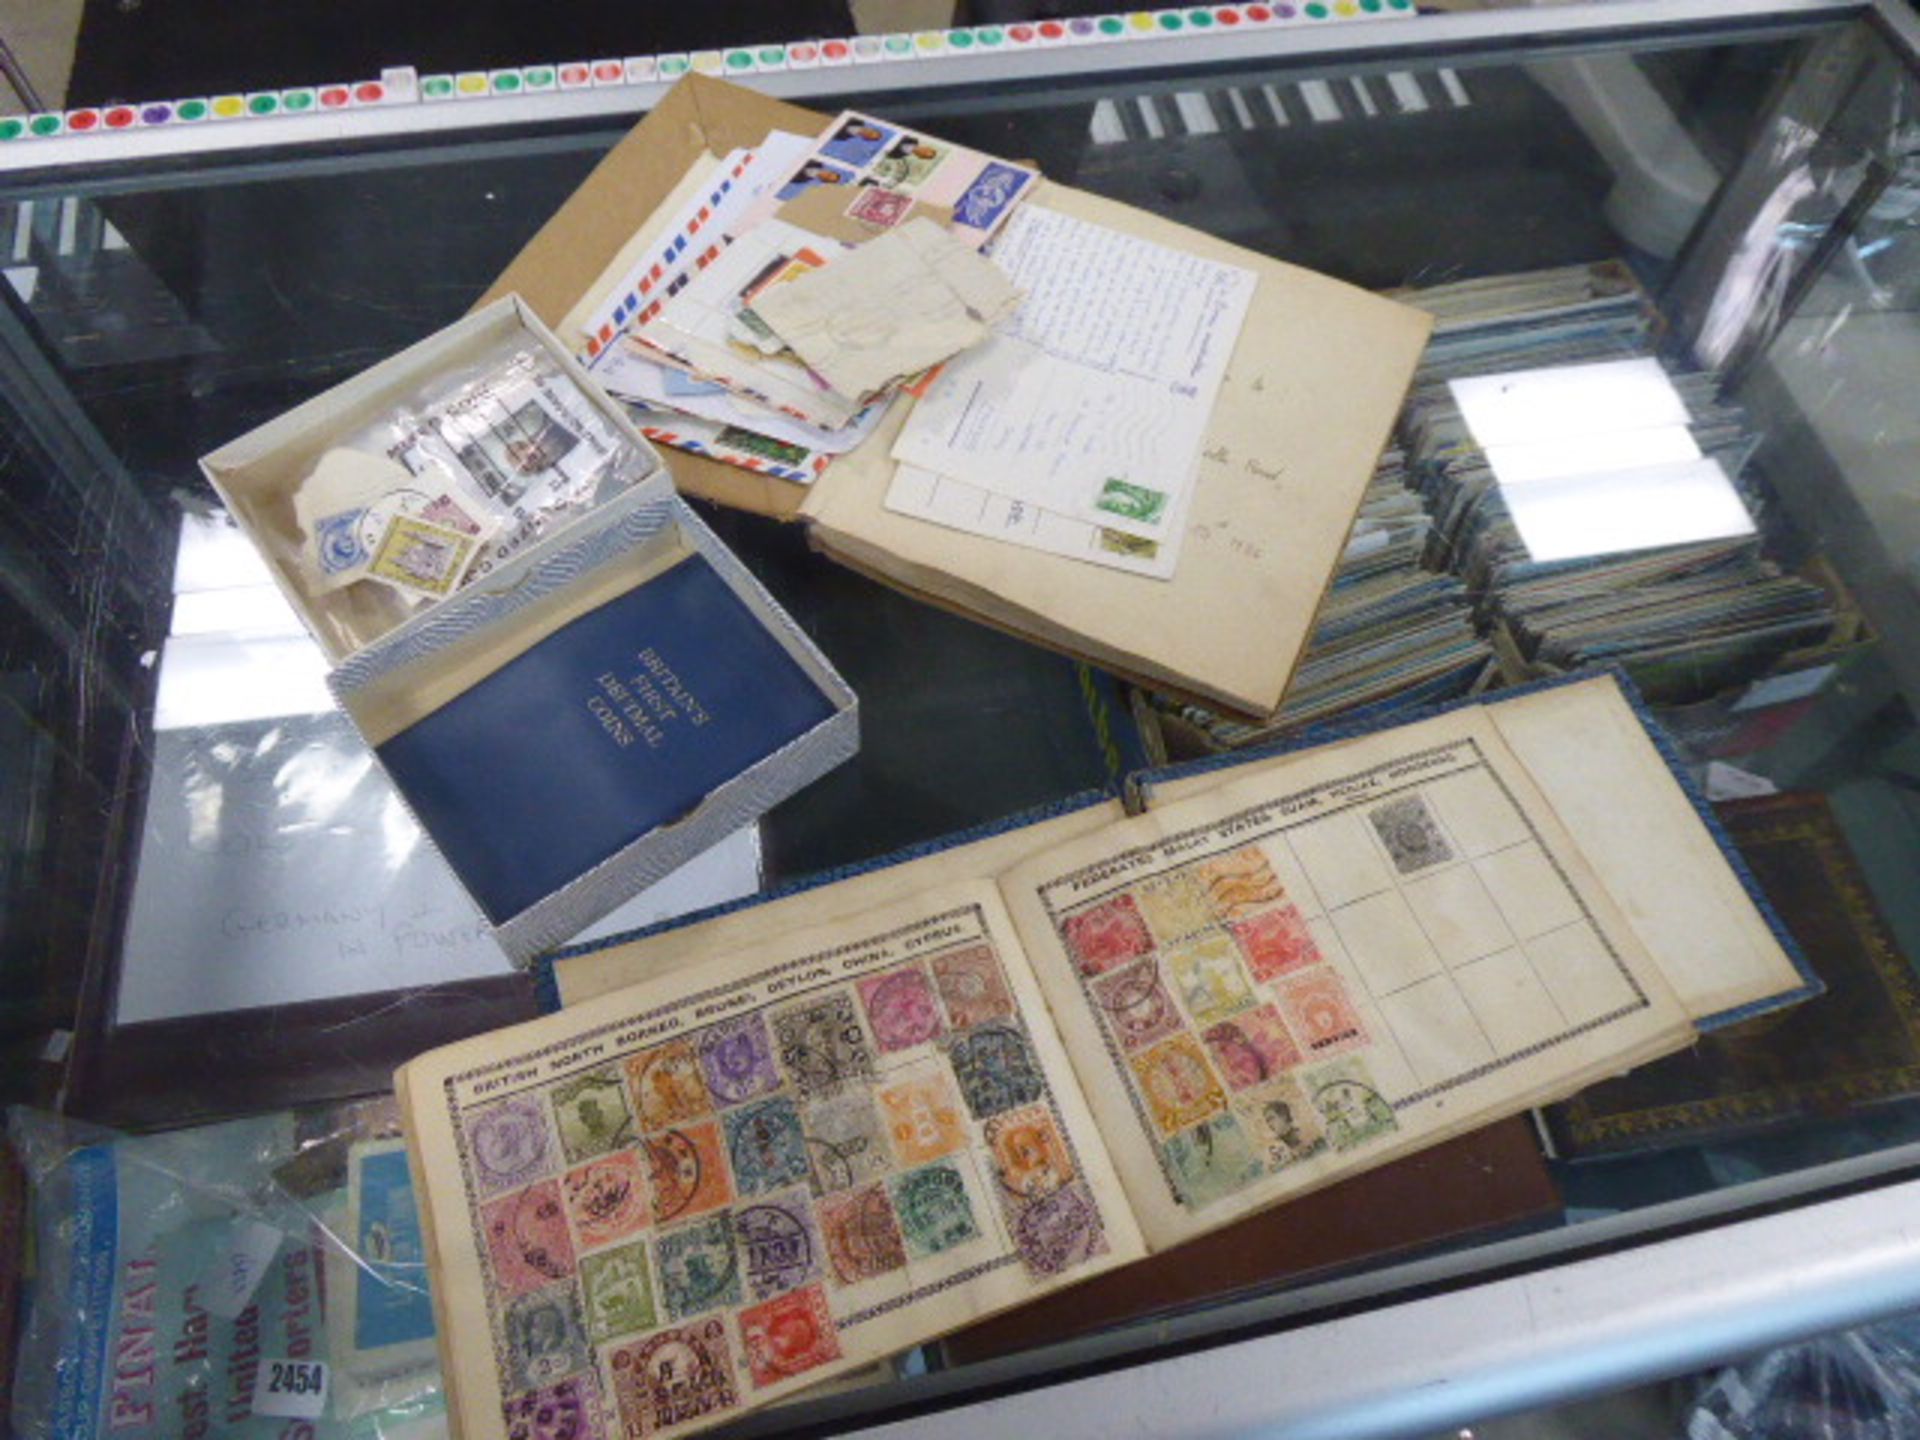 2477 - Bag containing stamp albums and loose stamps